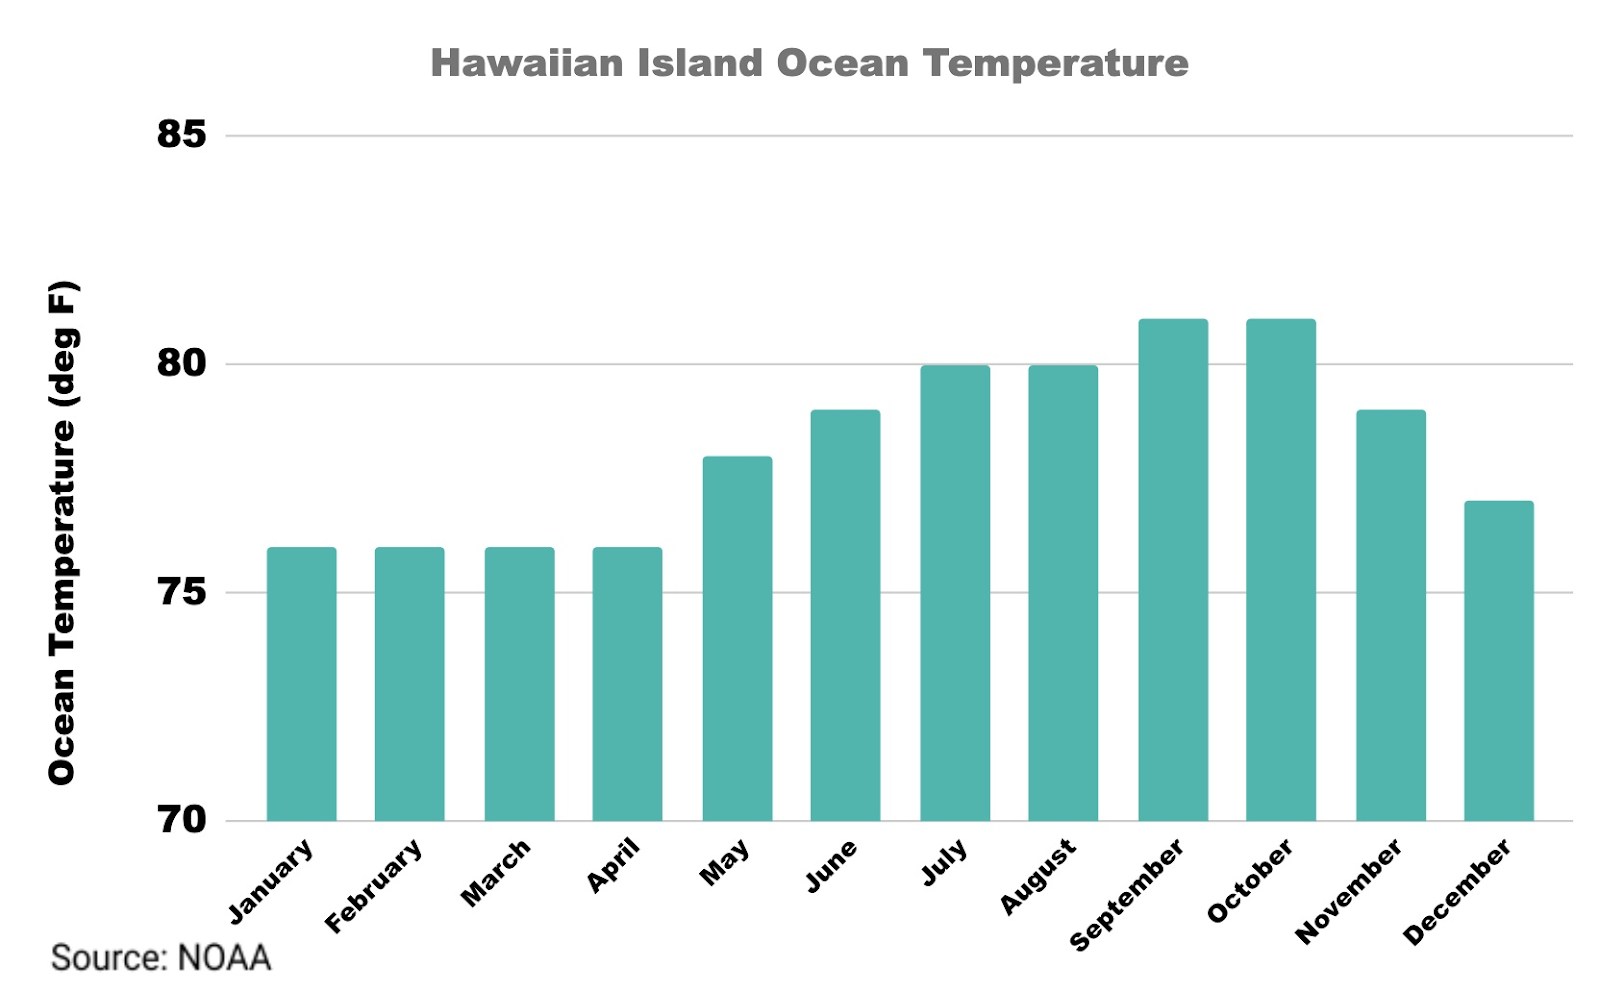 Graph from NOAA depicting ocean temperatures (Fahrenheit) in Hawaii year-round with a steady 76 degrees January to April, reaching a peak of about 81 for Oct and Nov. Ocean temperatures are around 78 degrees in Hawaii in December.